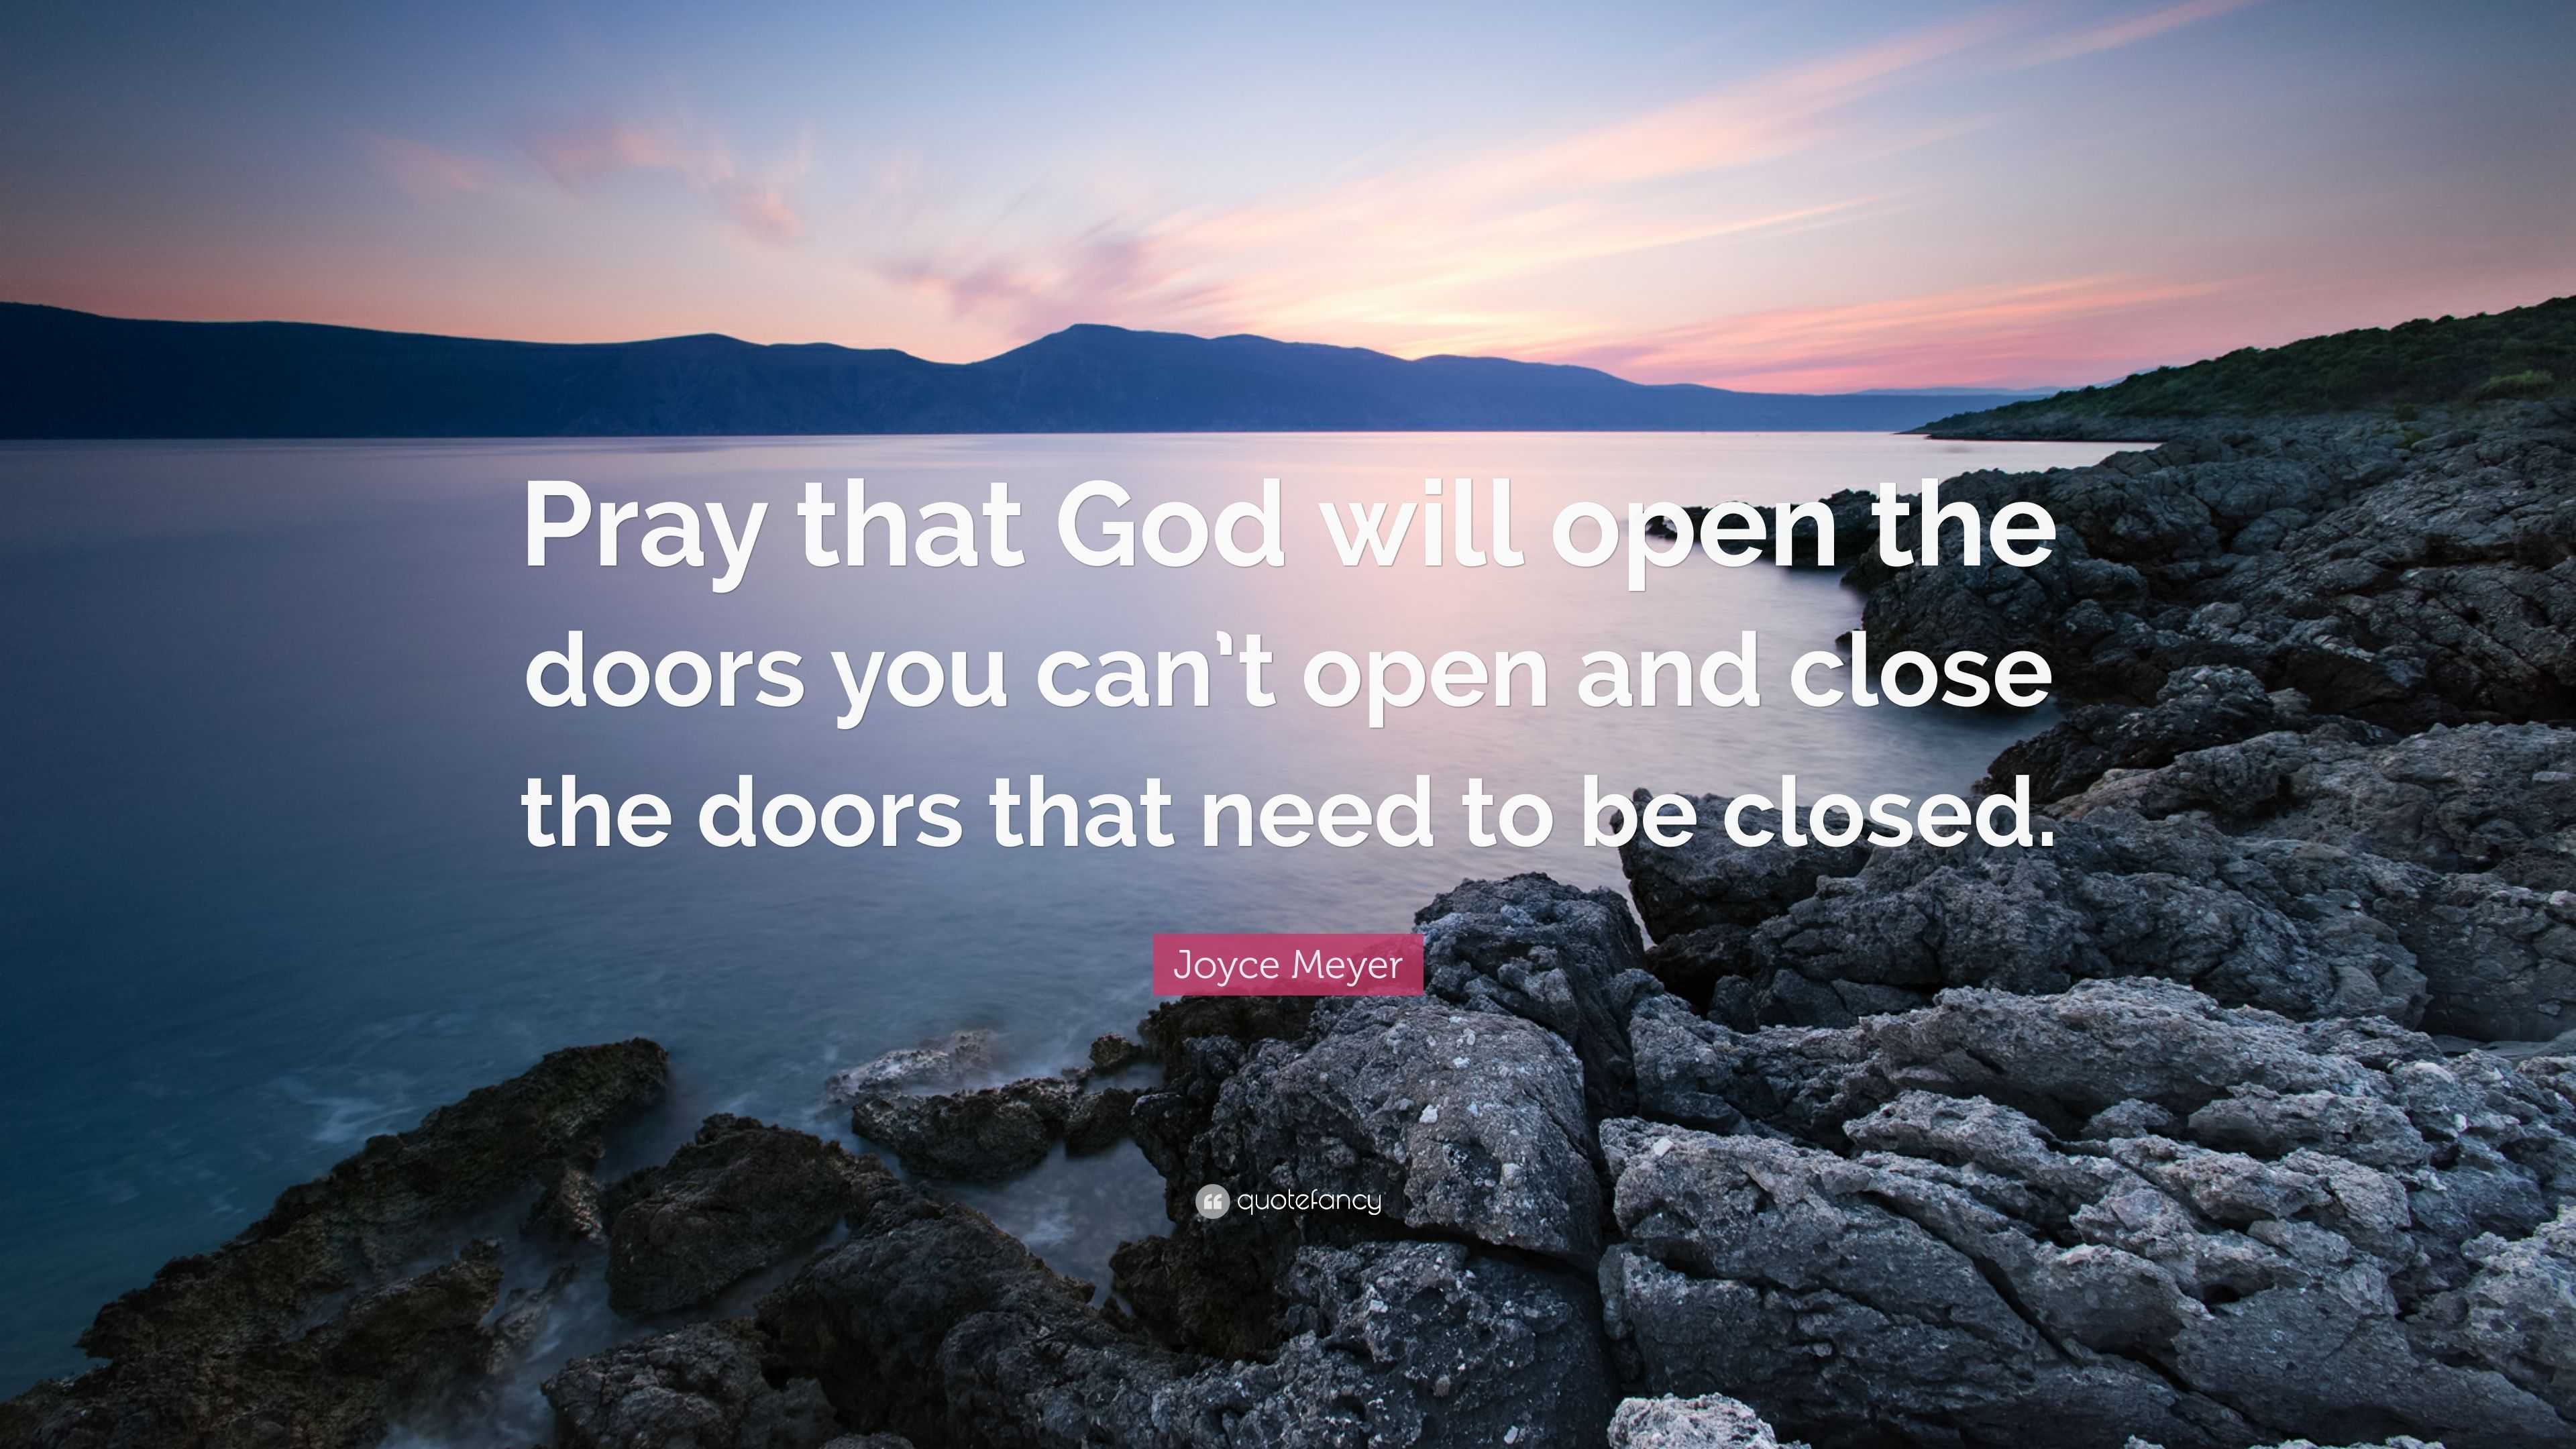 Joyce Meyer Quote: “Pray that God will open the doors you can’t open ...